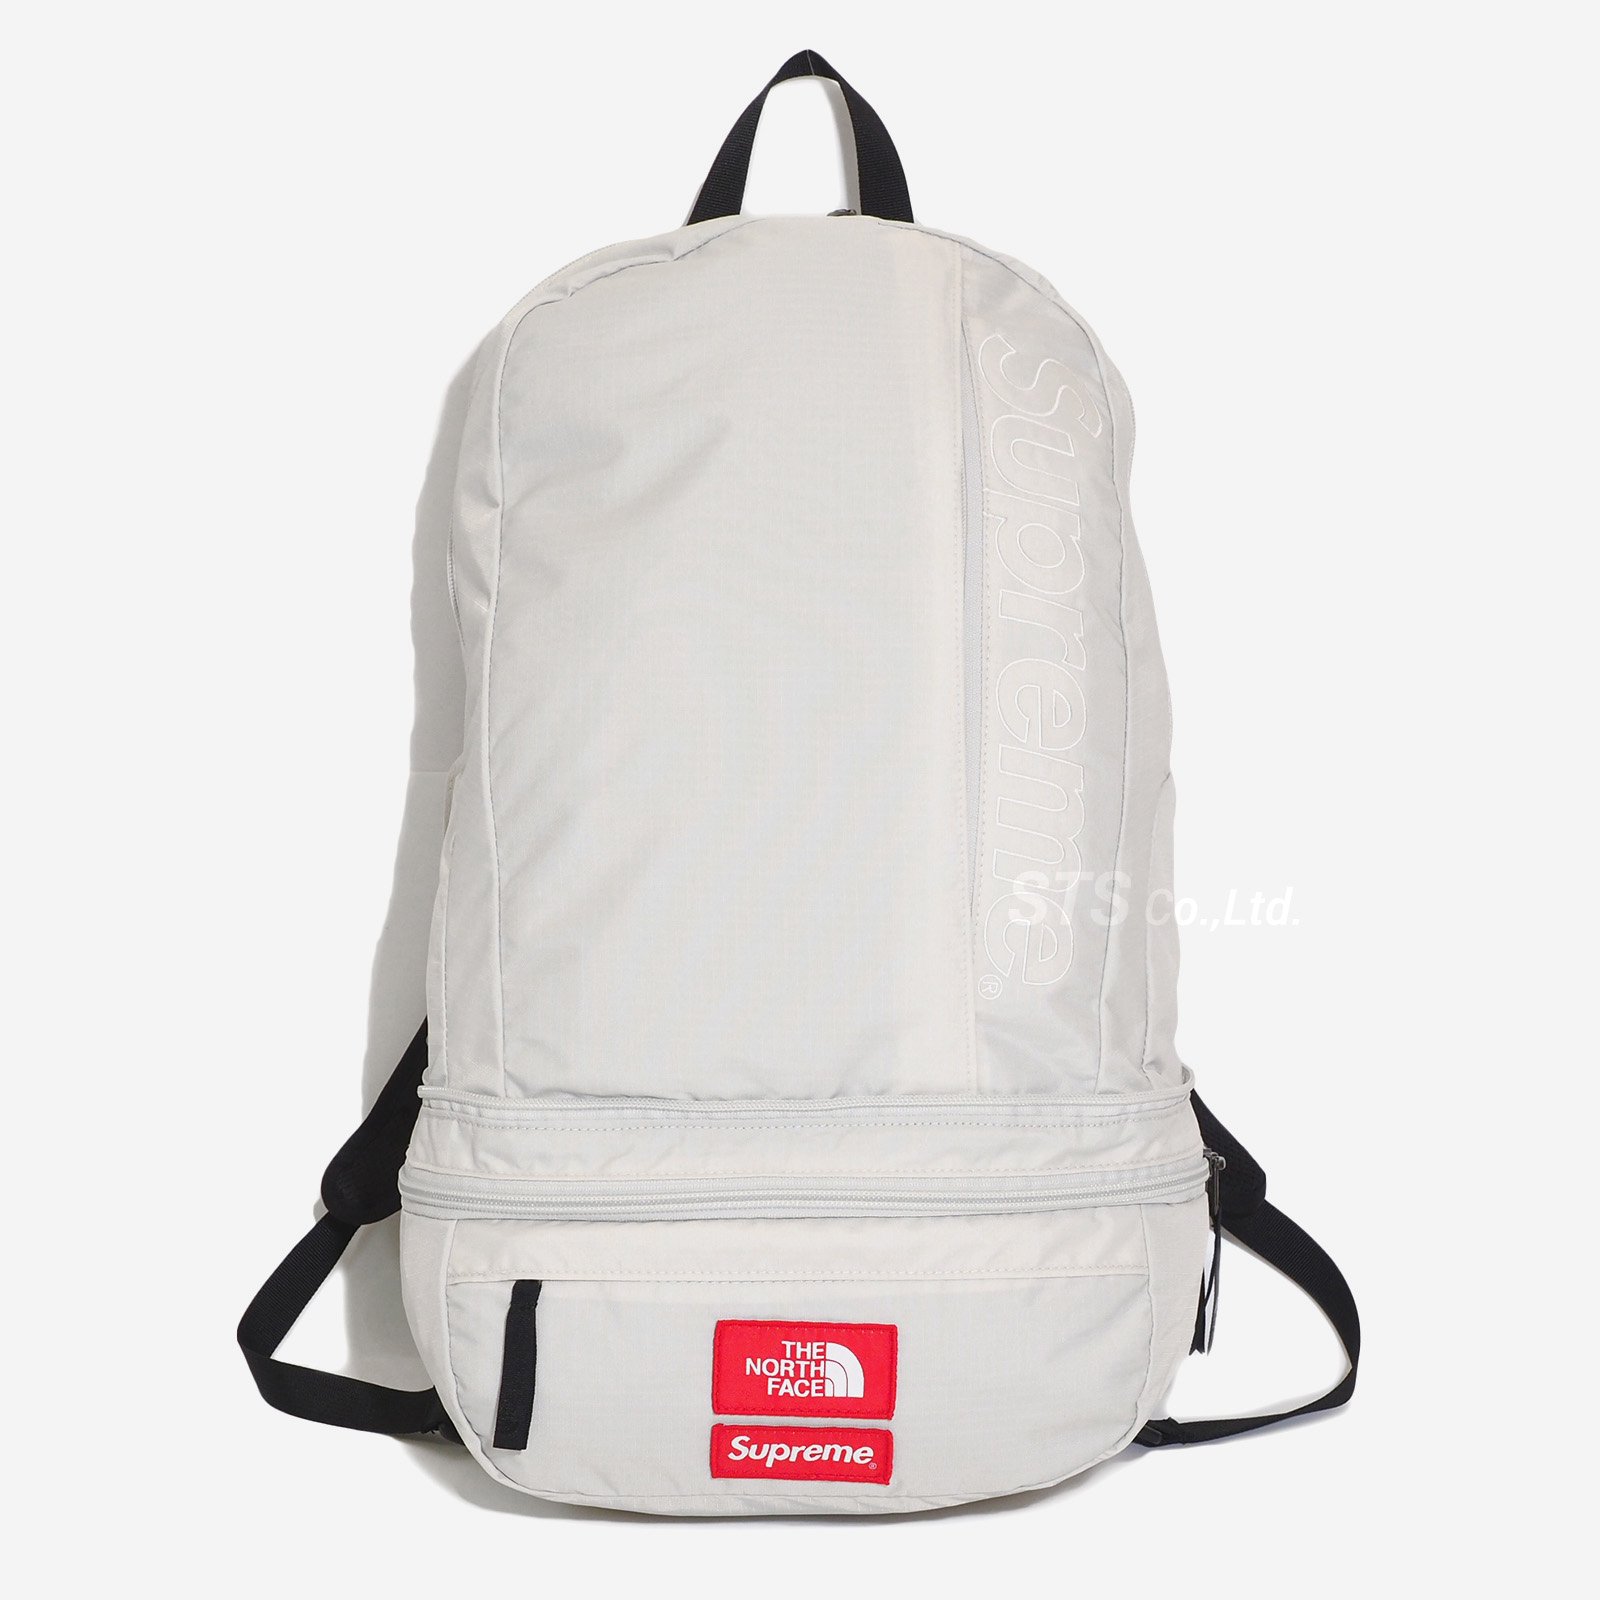 Supreme/The North Face Trekking Convertible Backpack + Waist Bag 